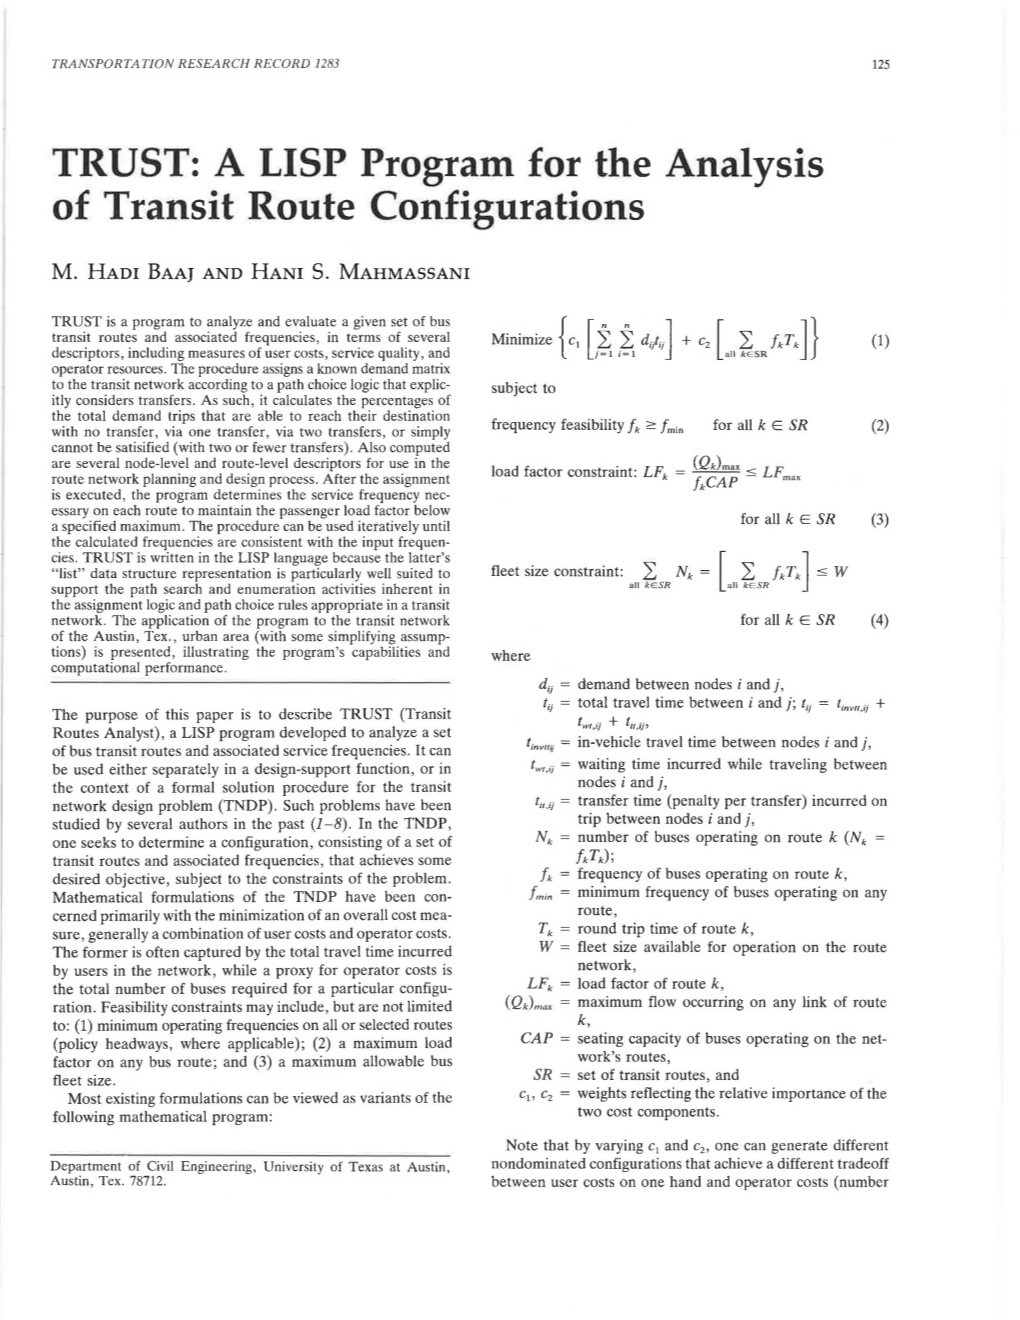 A LISP Program for the Analysis of Transit Route Configurations